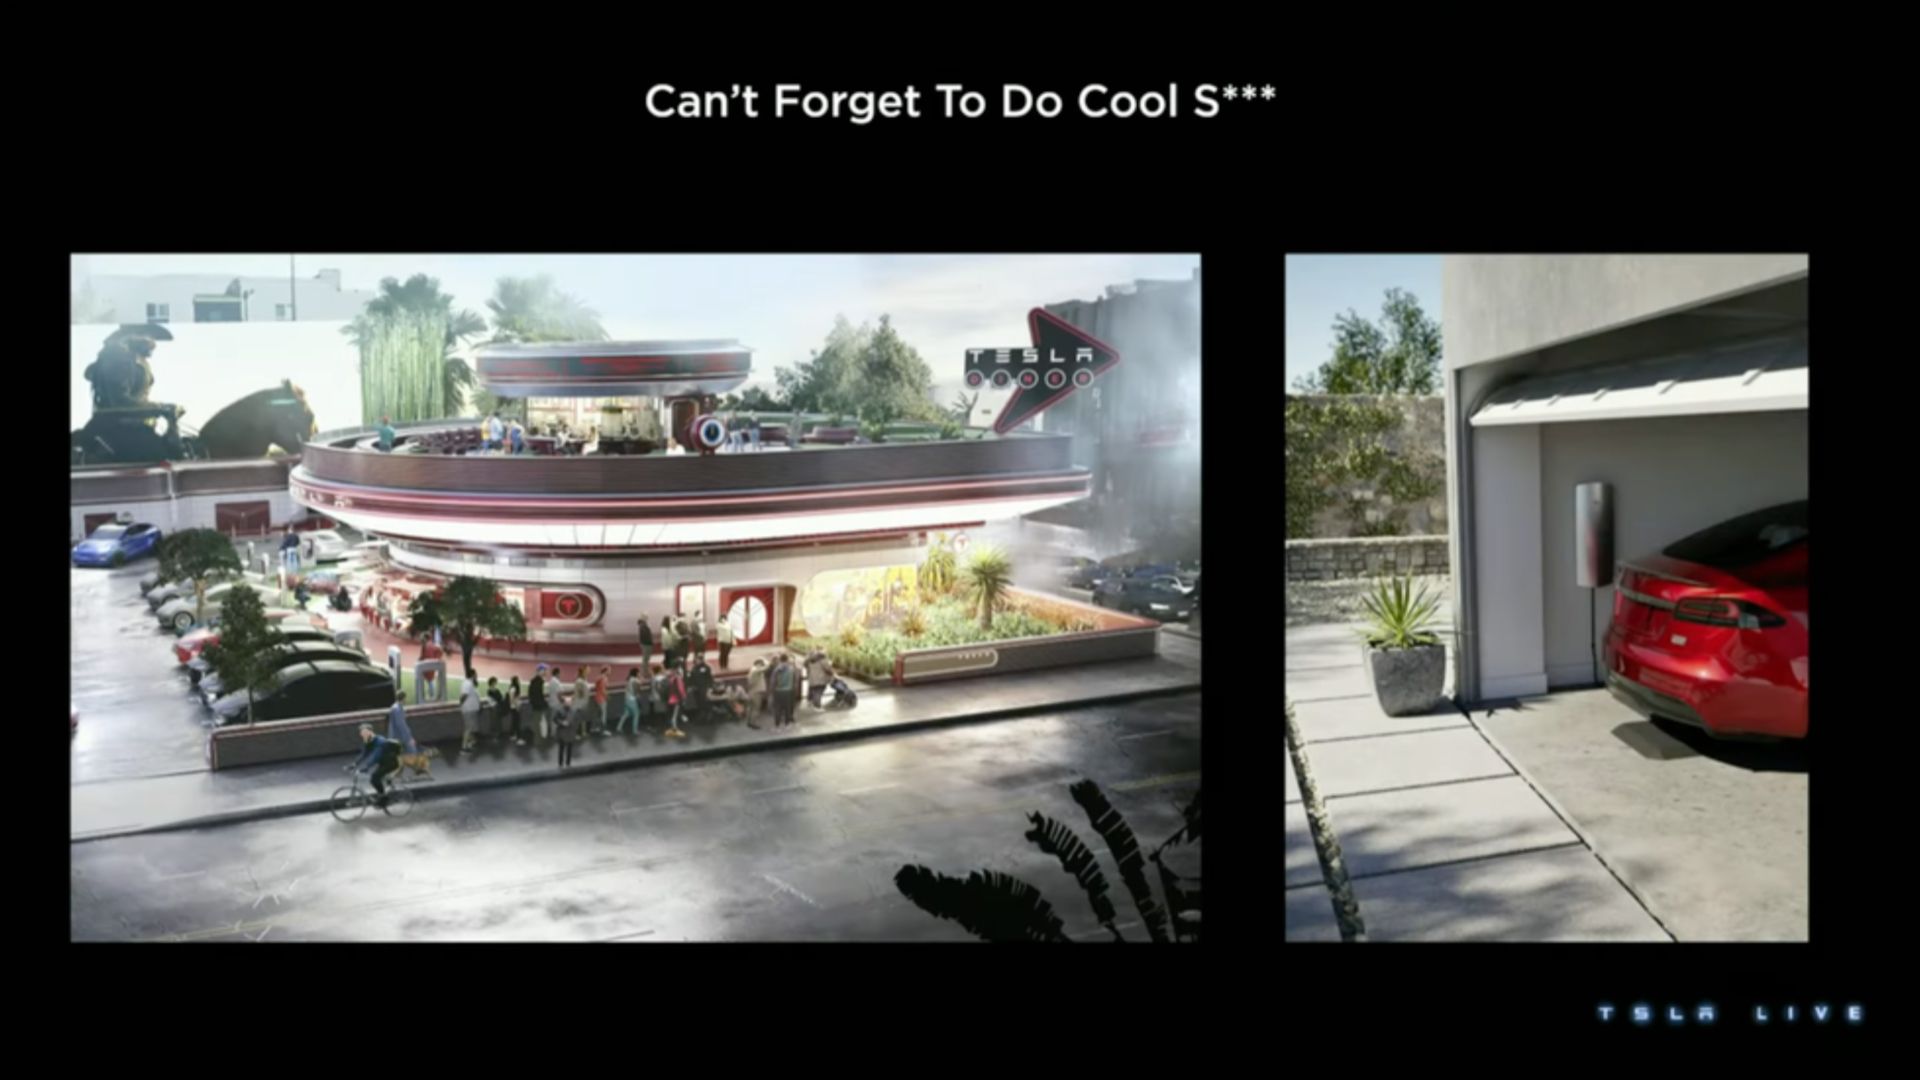 Proposed 50s-style diner from Tesla Investor's Day slide